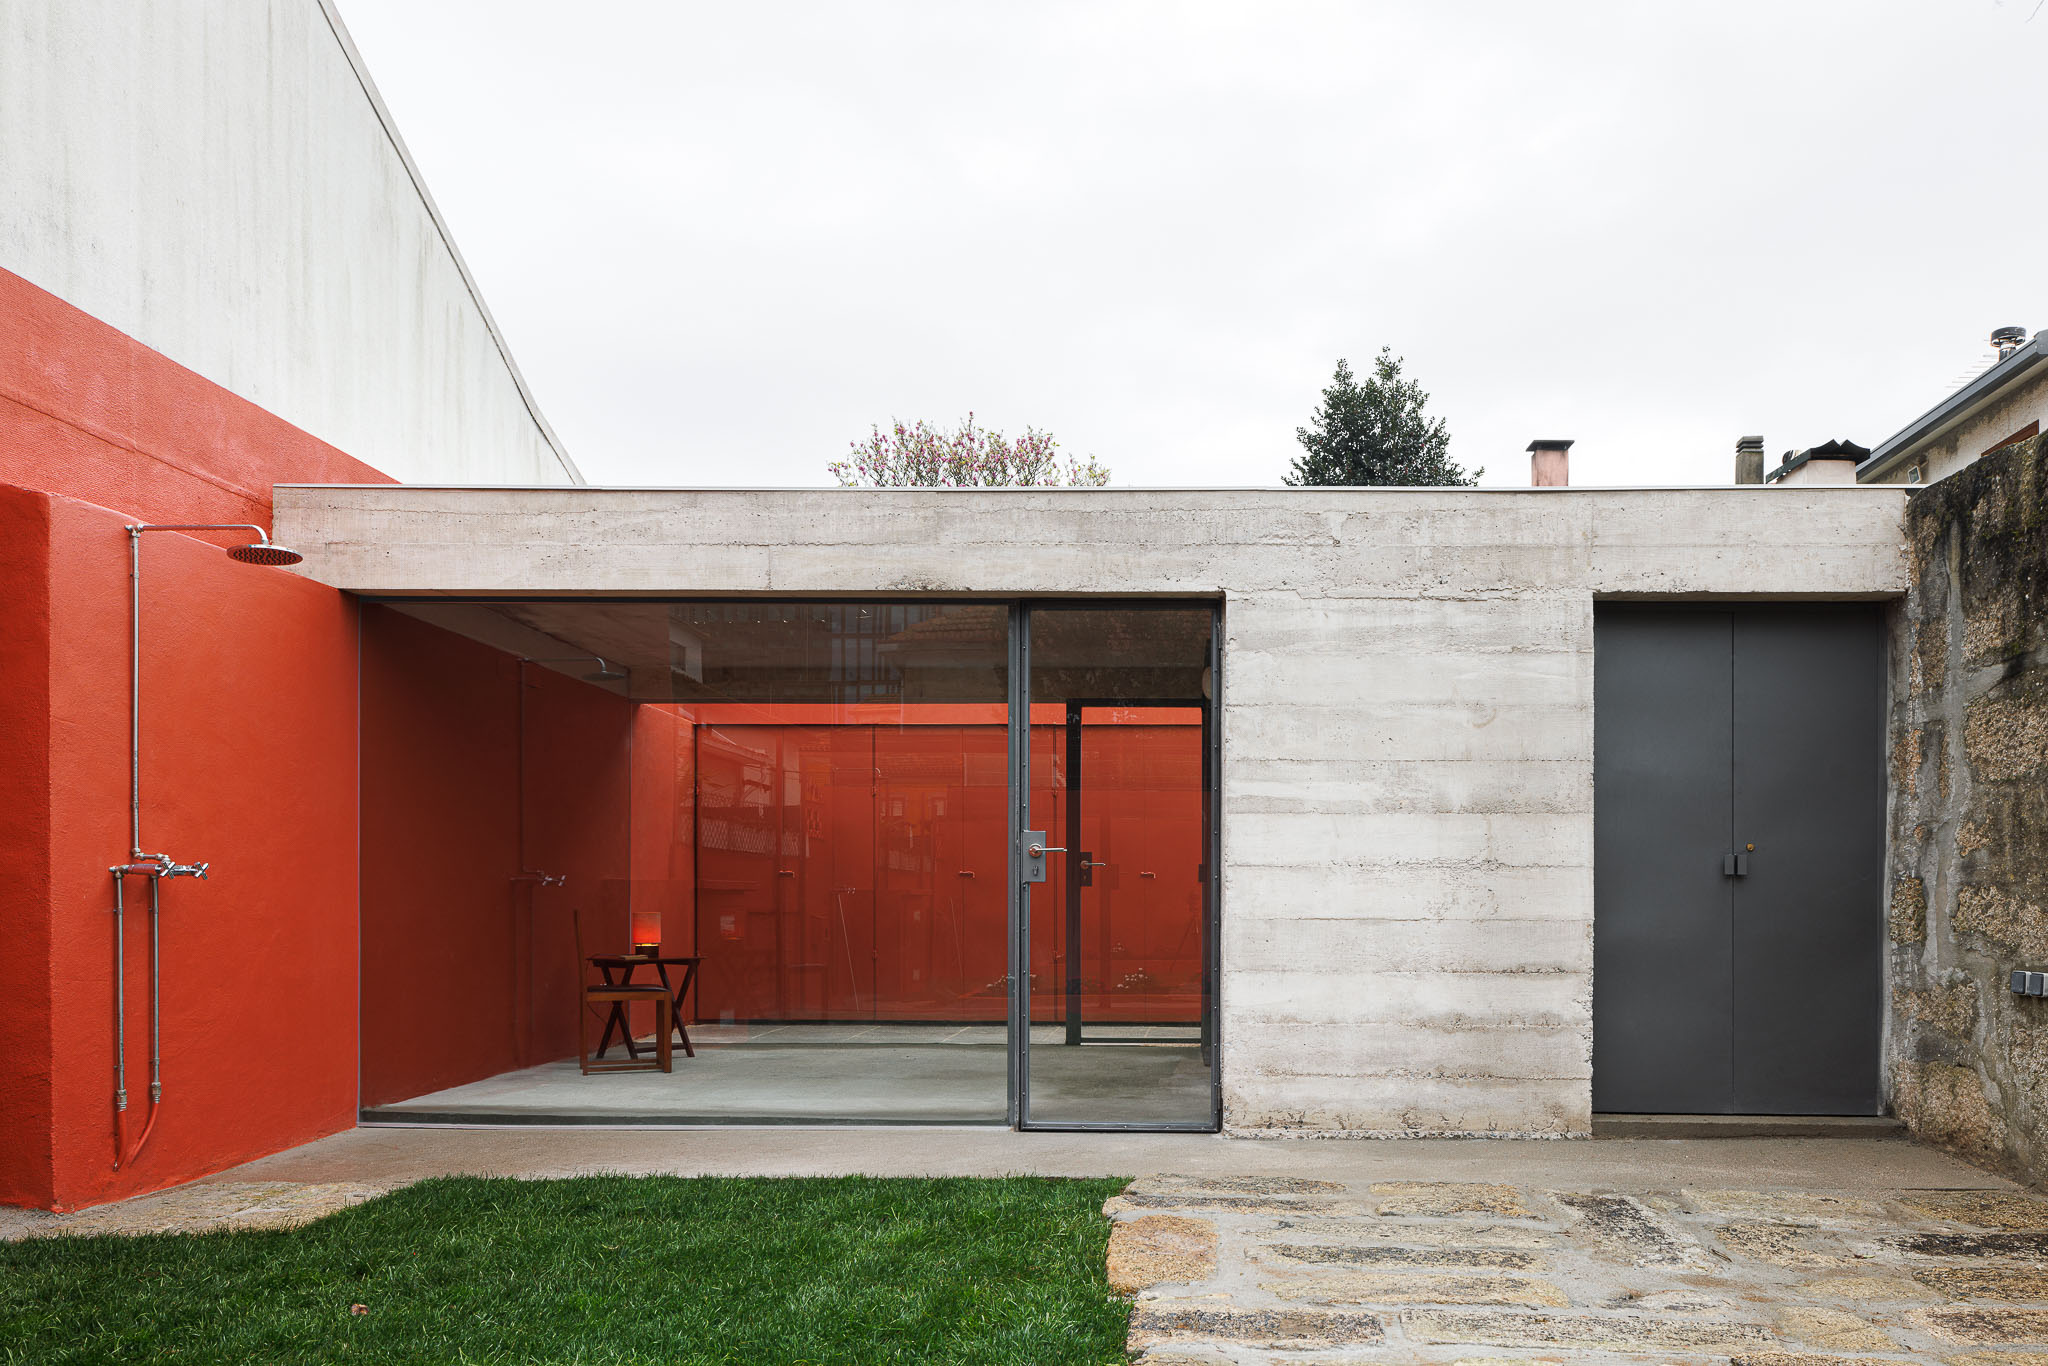 Garden Pavilion was designed by José Pedro Lima to complement the program of a house